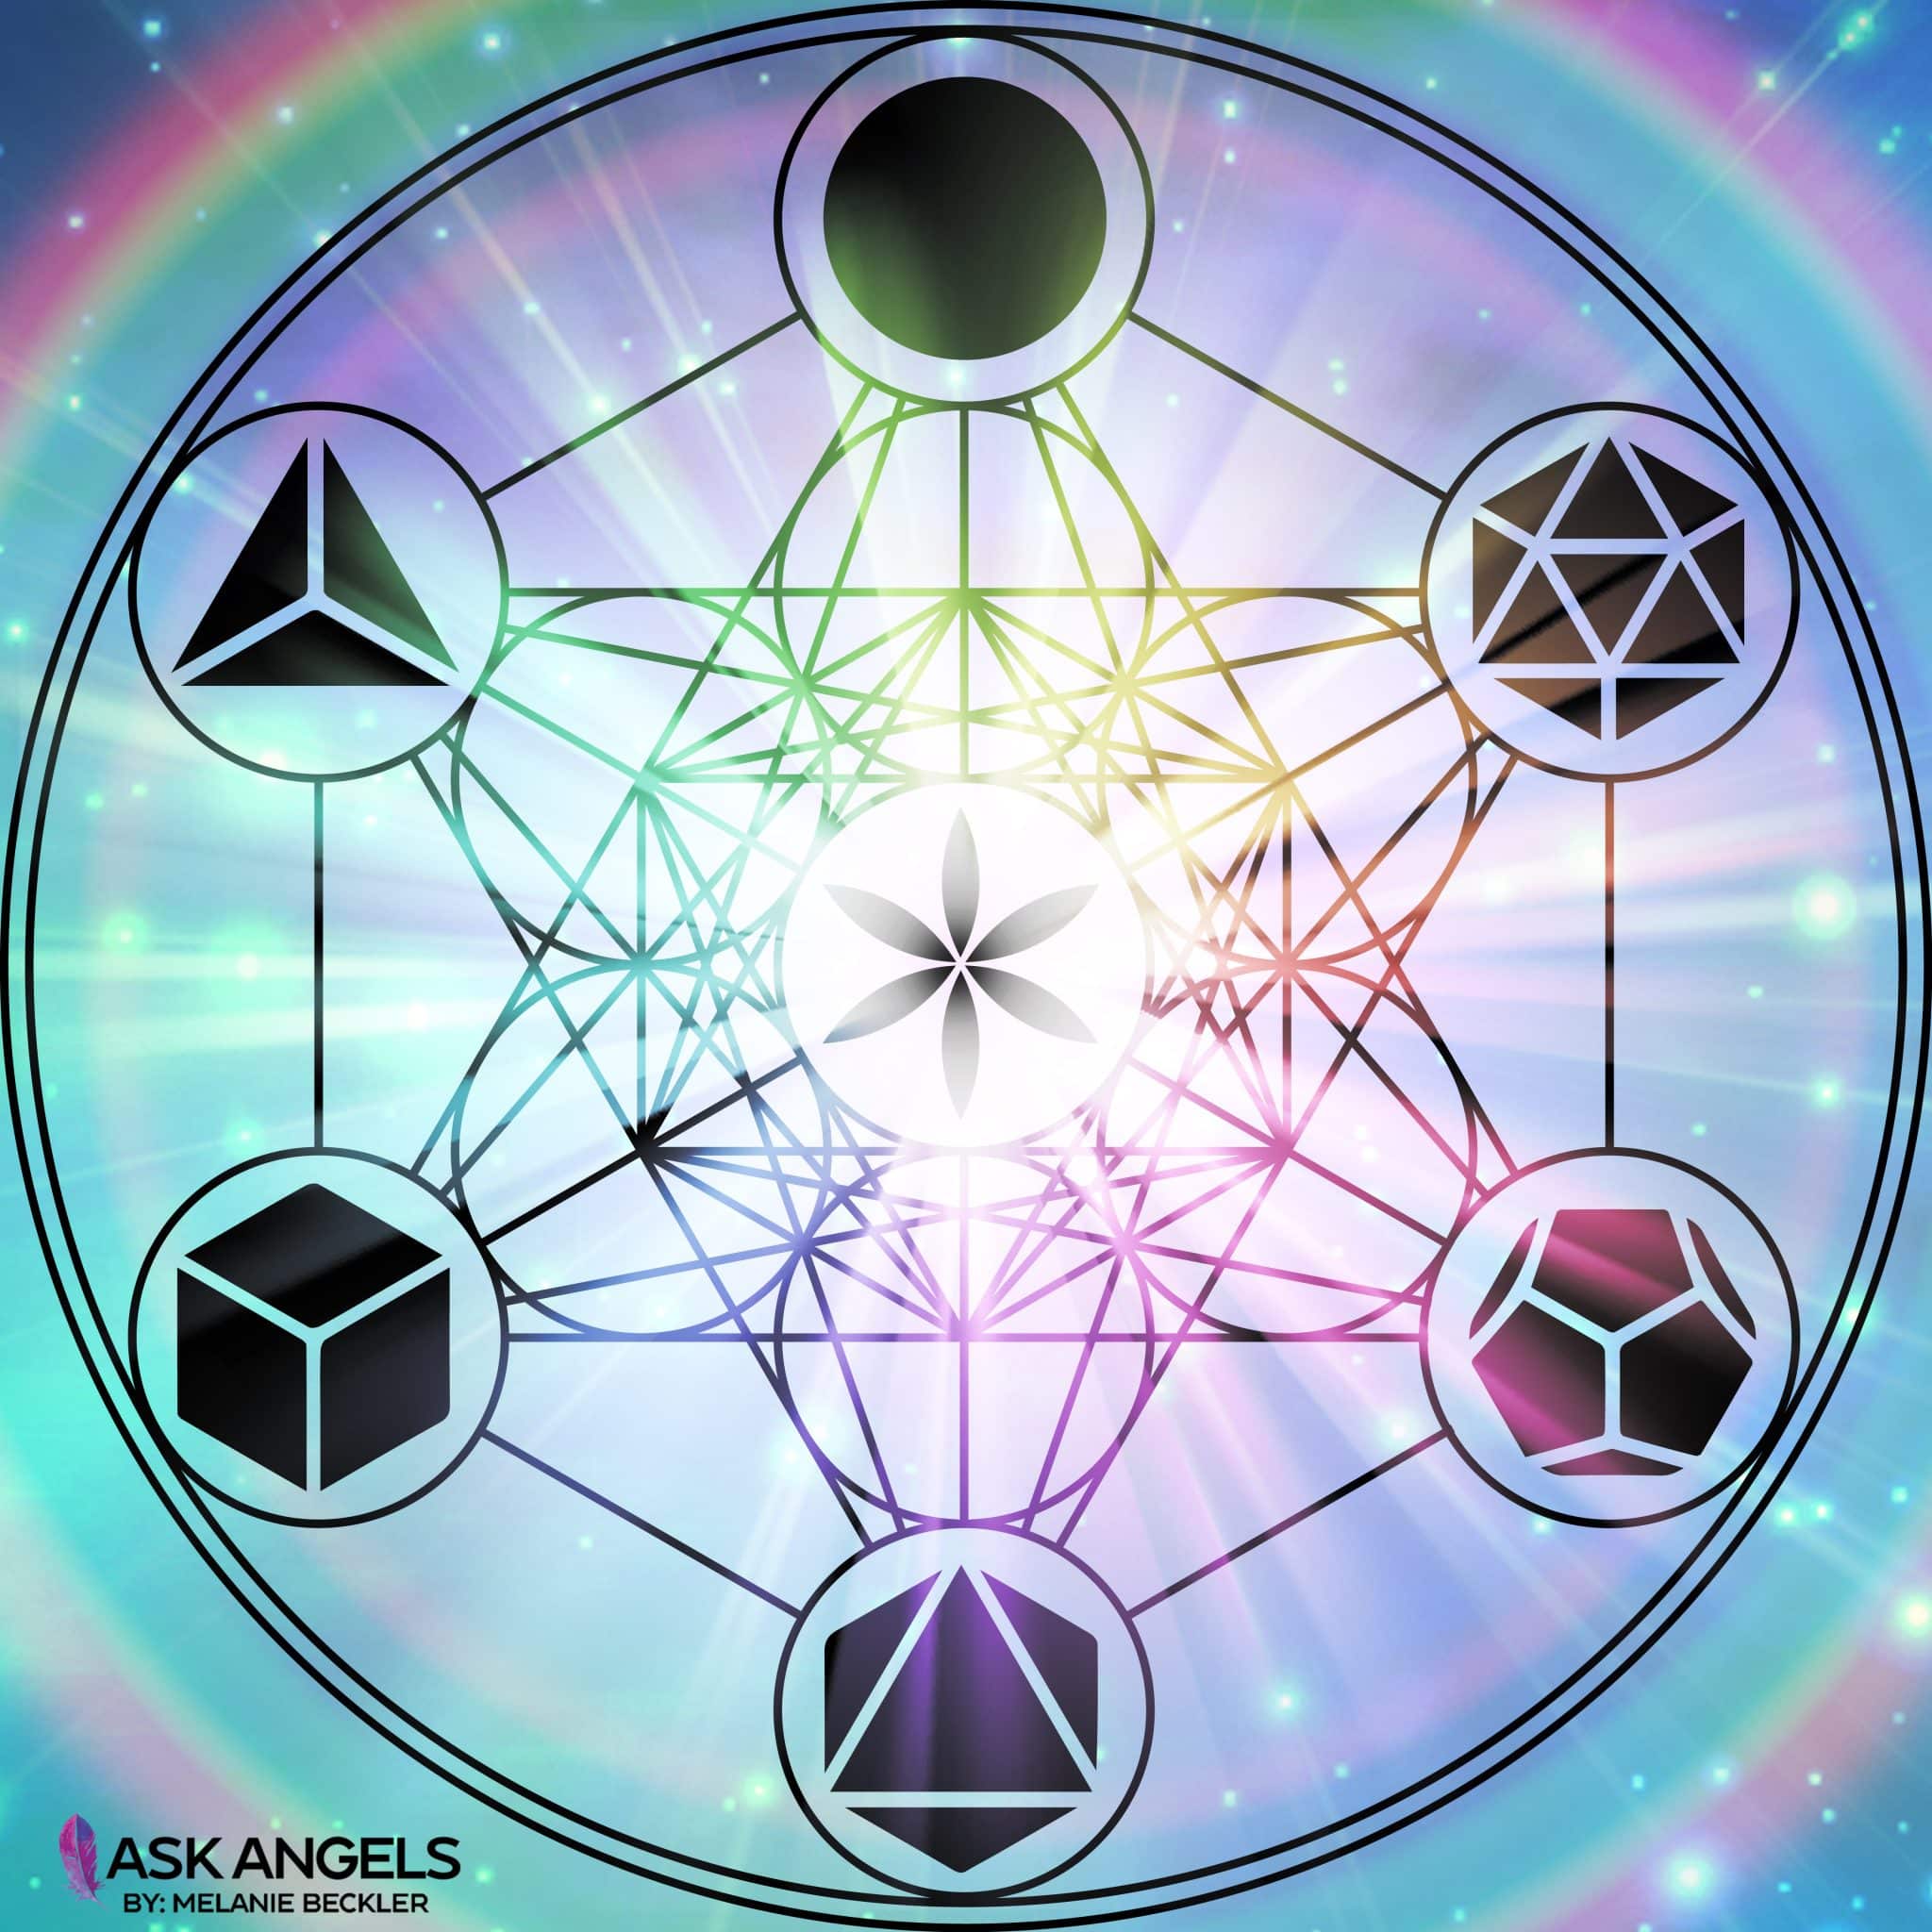 Platonic Solids and Metatrons Cube